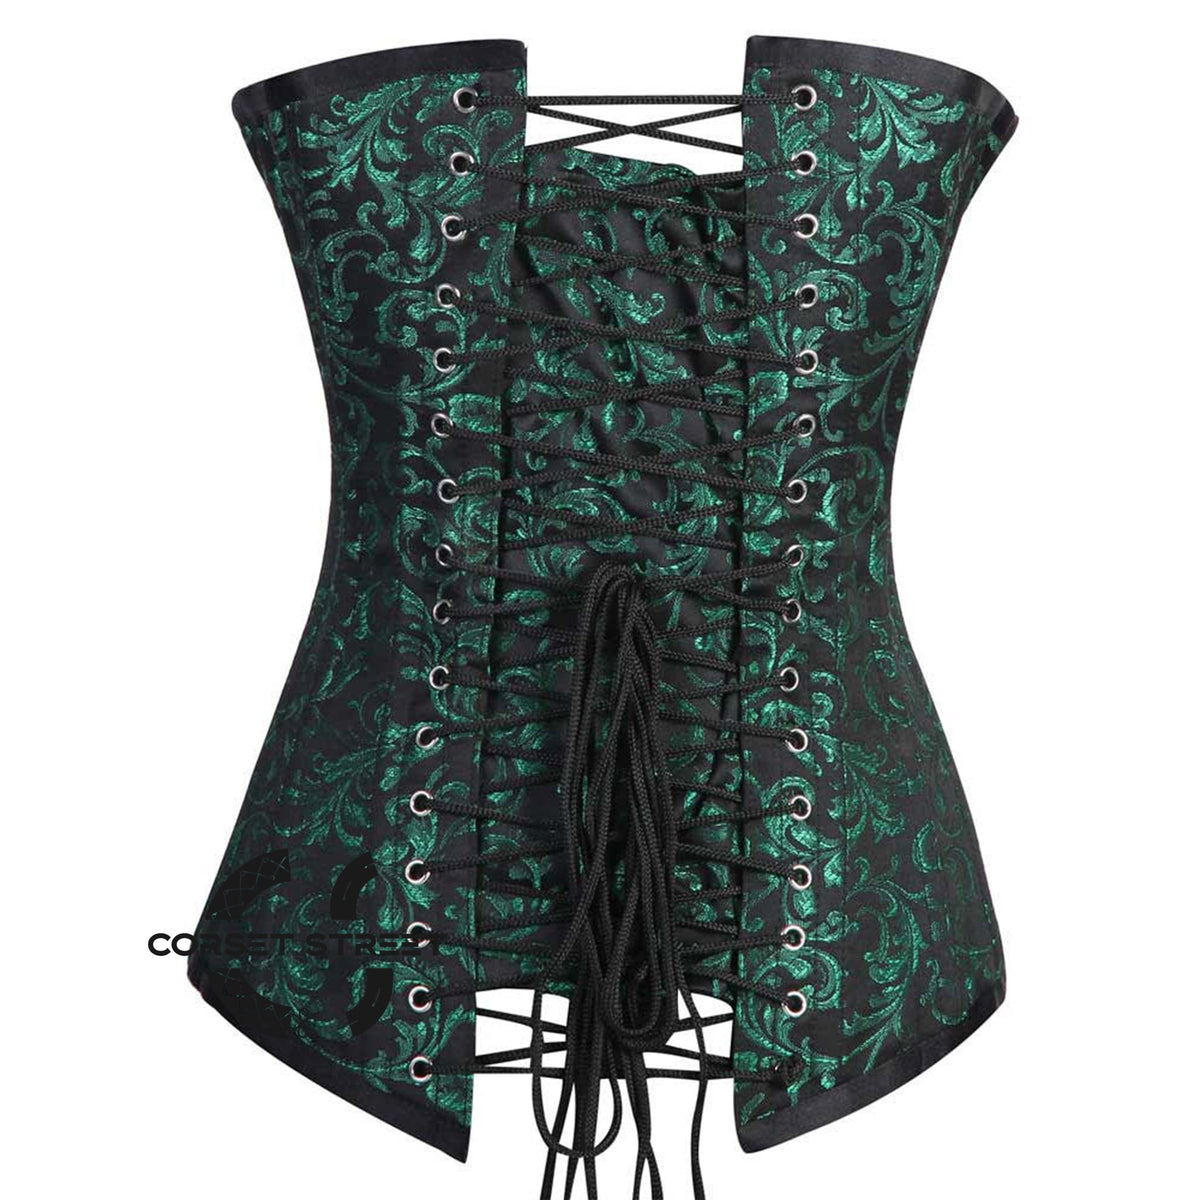 Green And Black Brocade Longline Front zipper Gothic Corset Burlesque Overbust Plus Size Costume